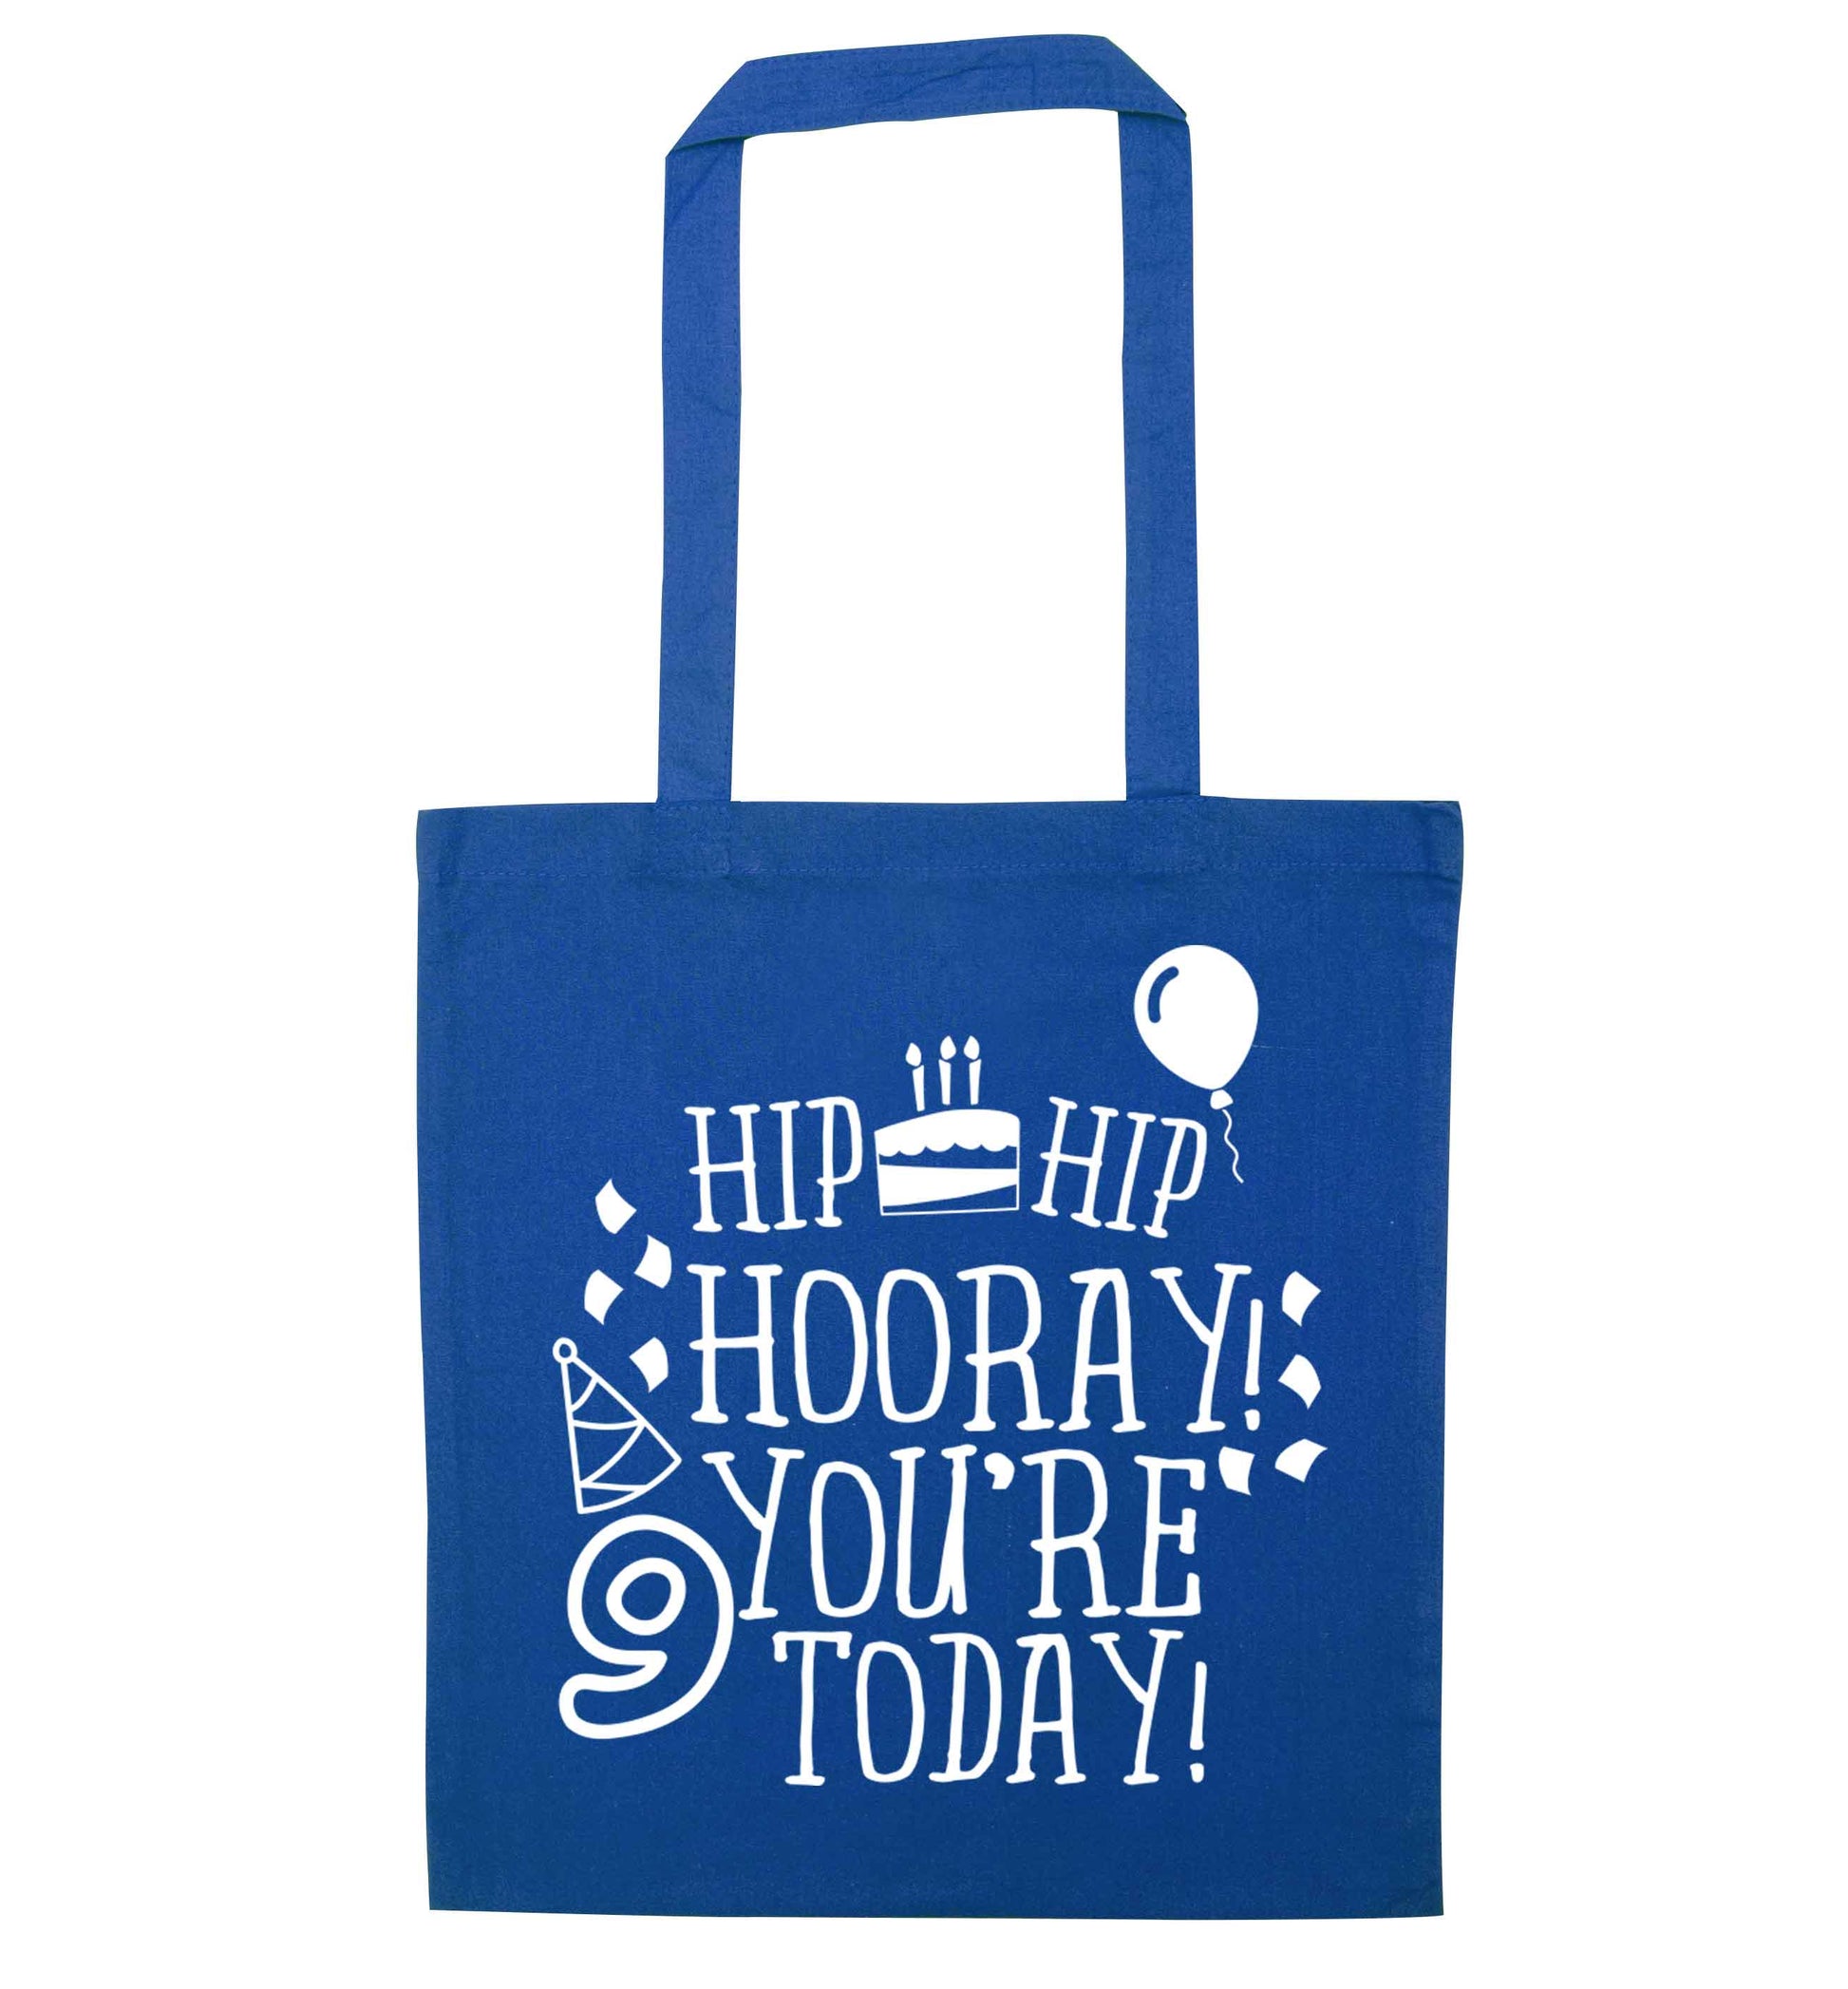 Hip hip hooray you're 9 today! blue tote bag